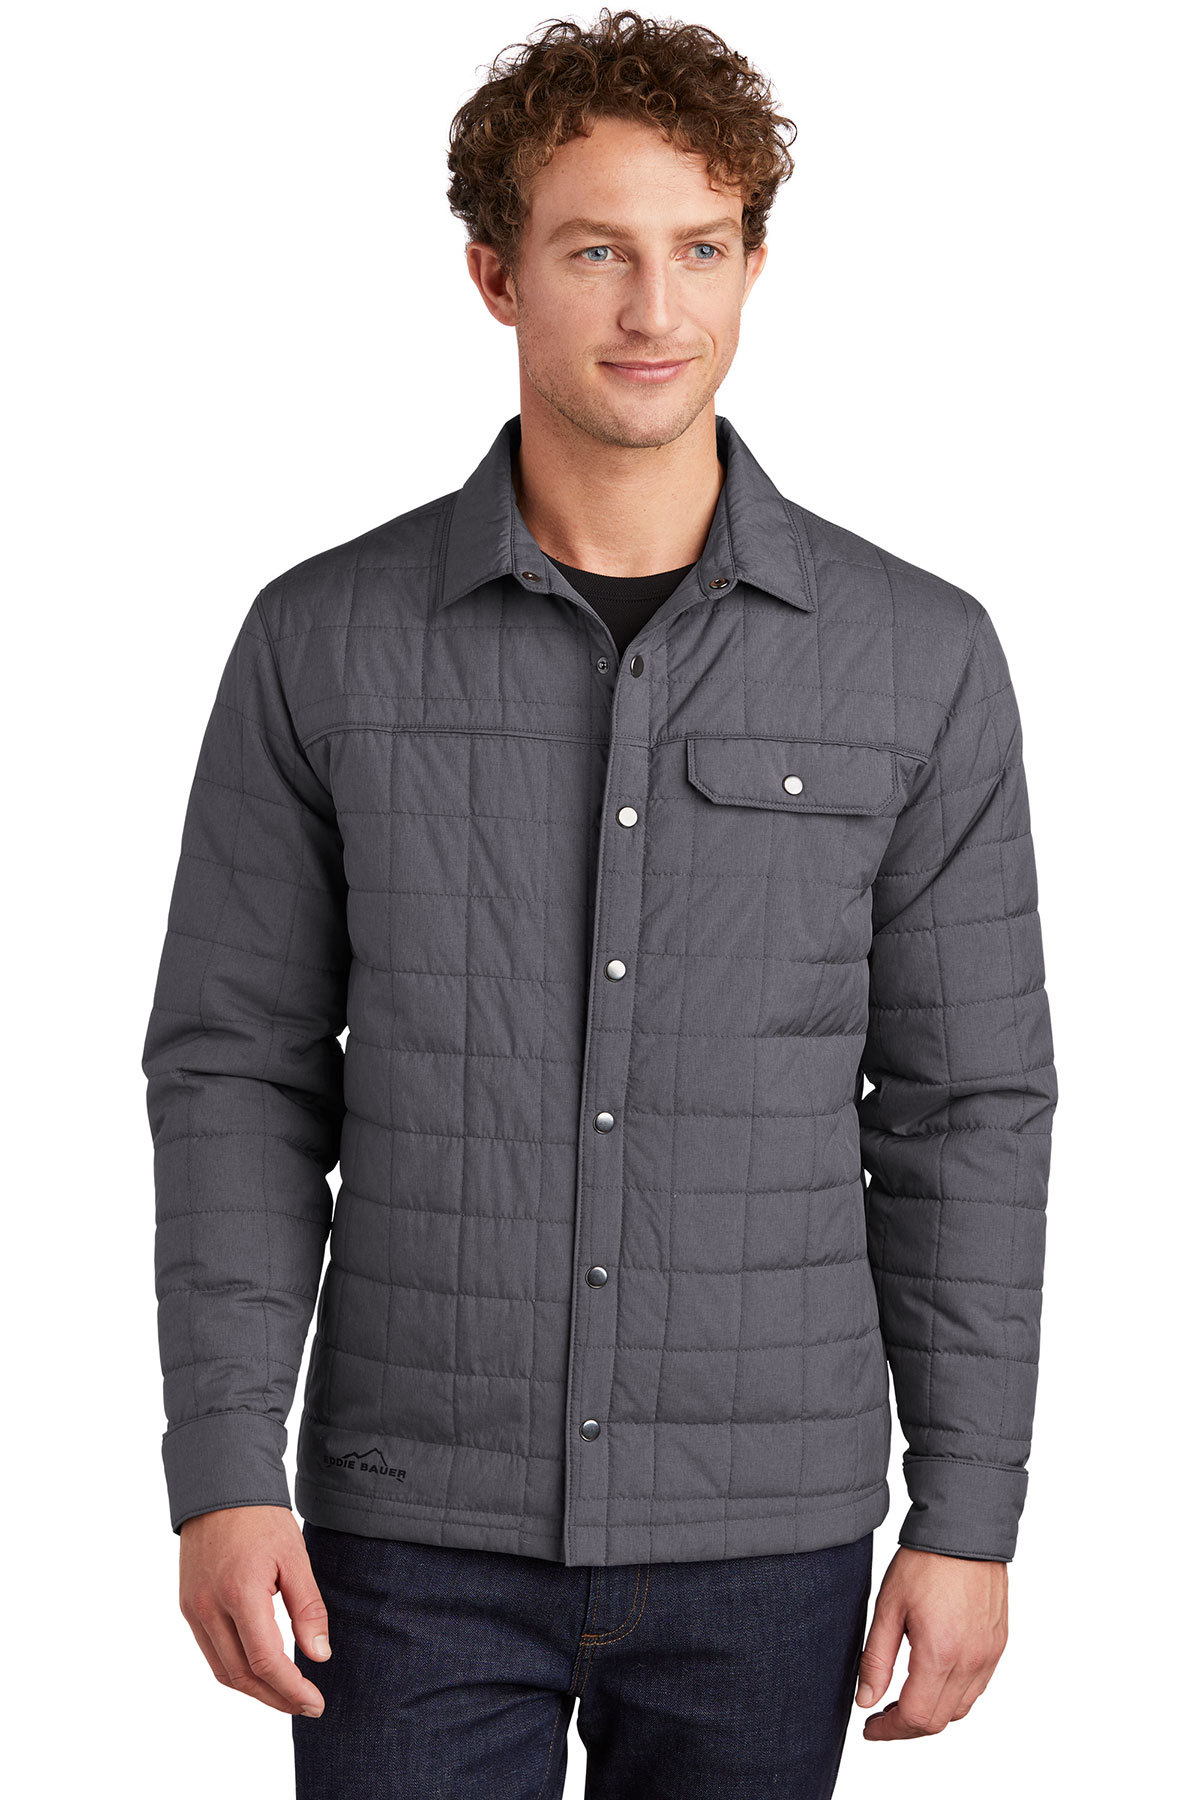 Eddie Bauer Shirt Jac | Product | Company Casuals